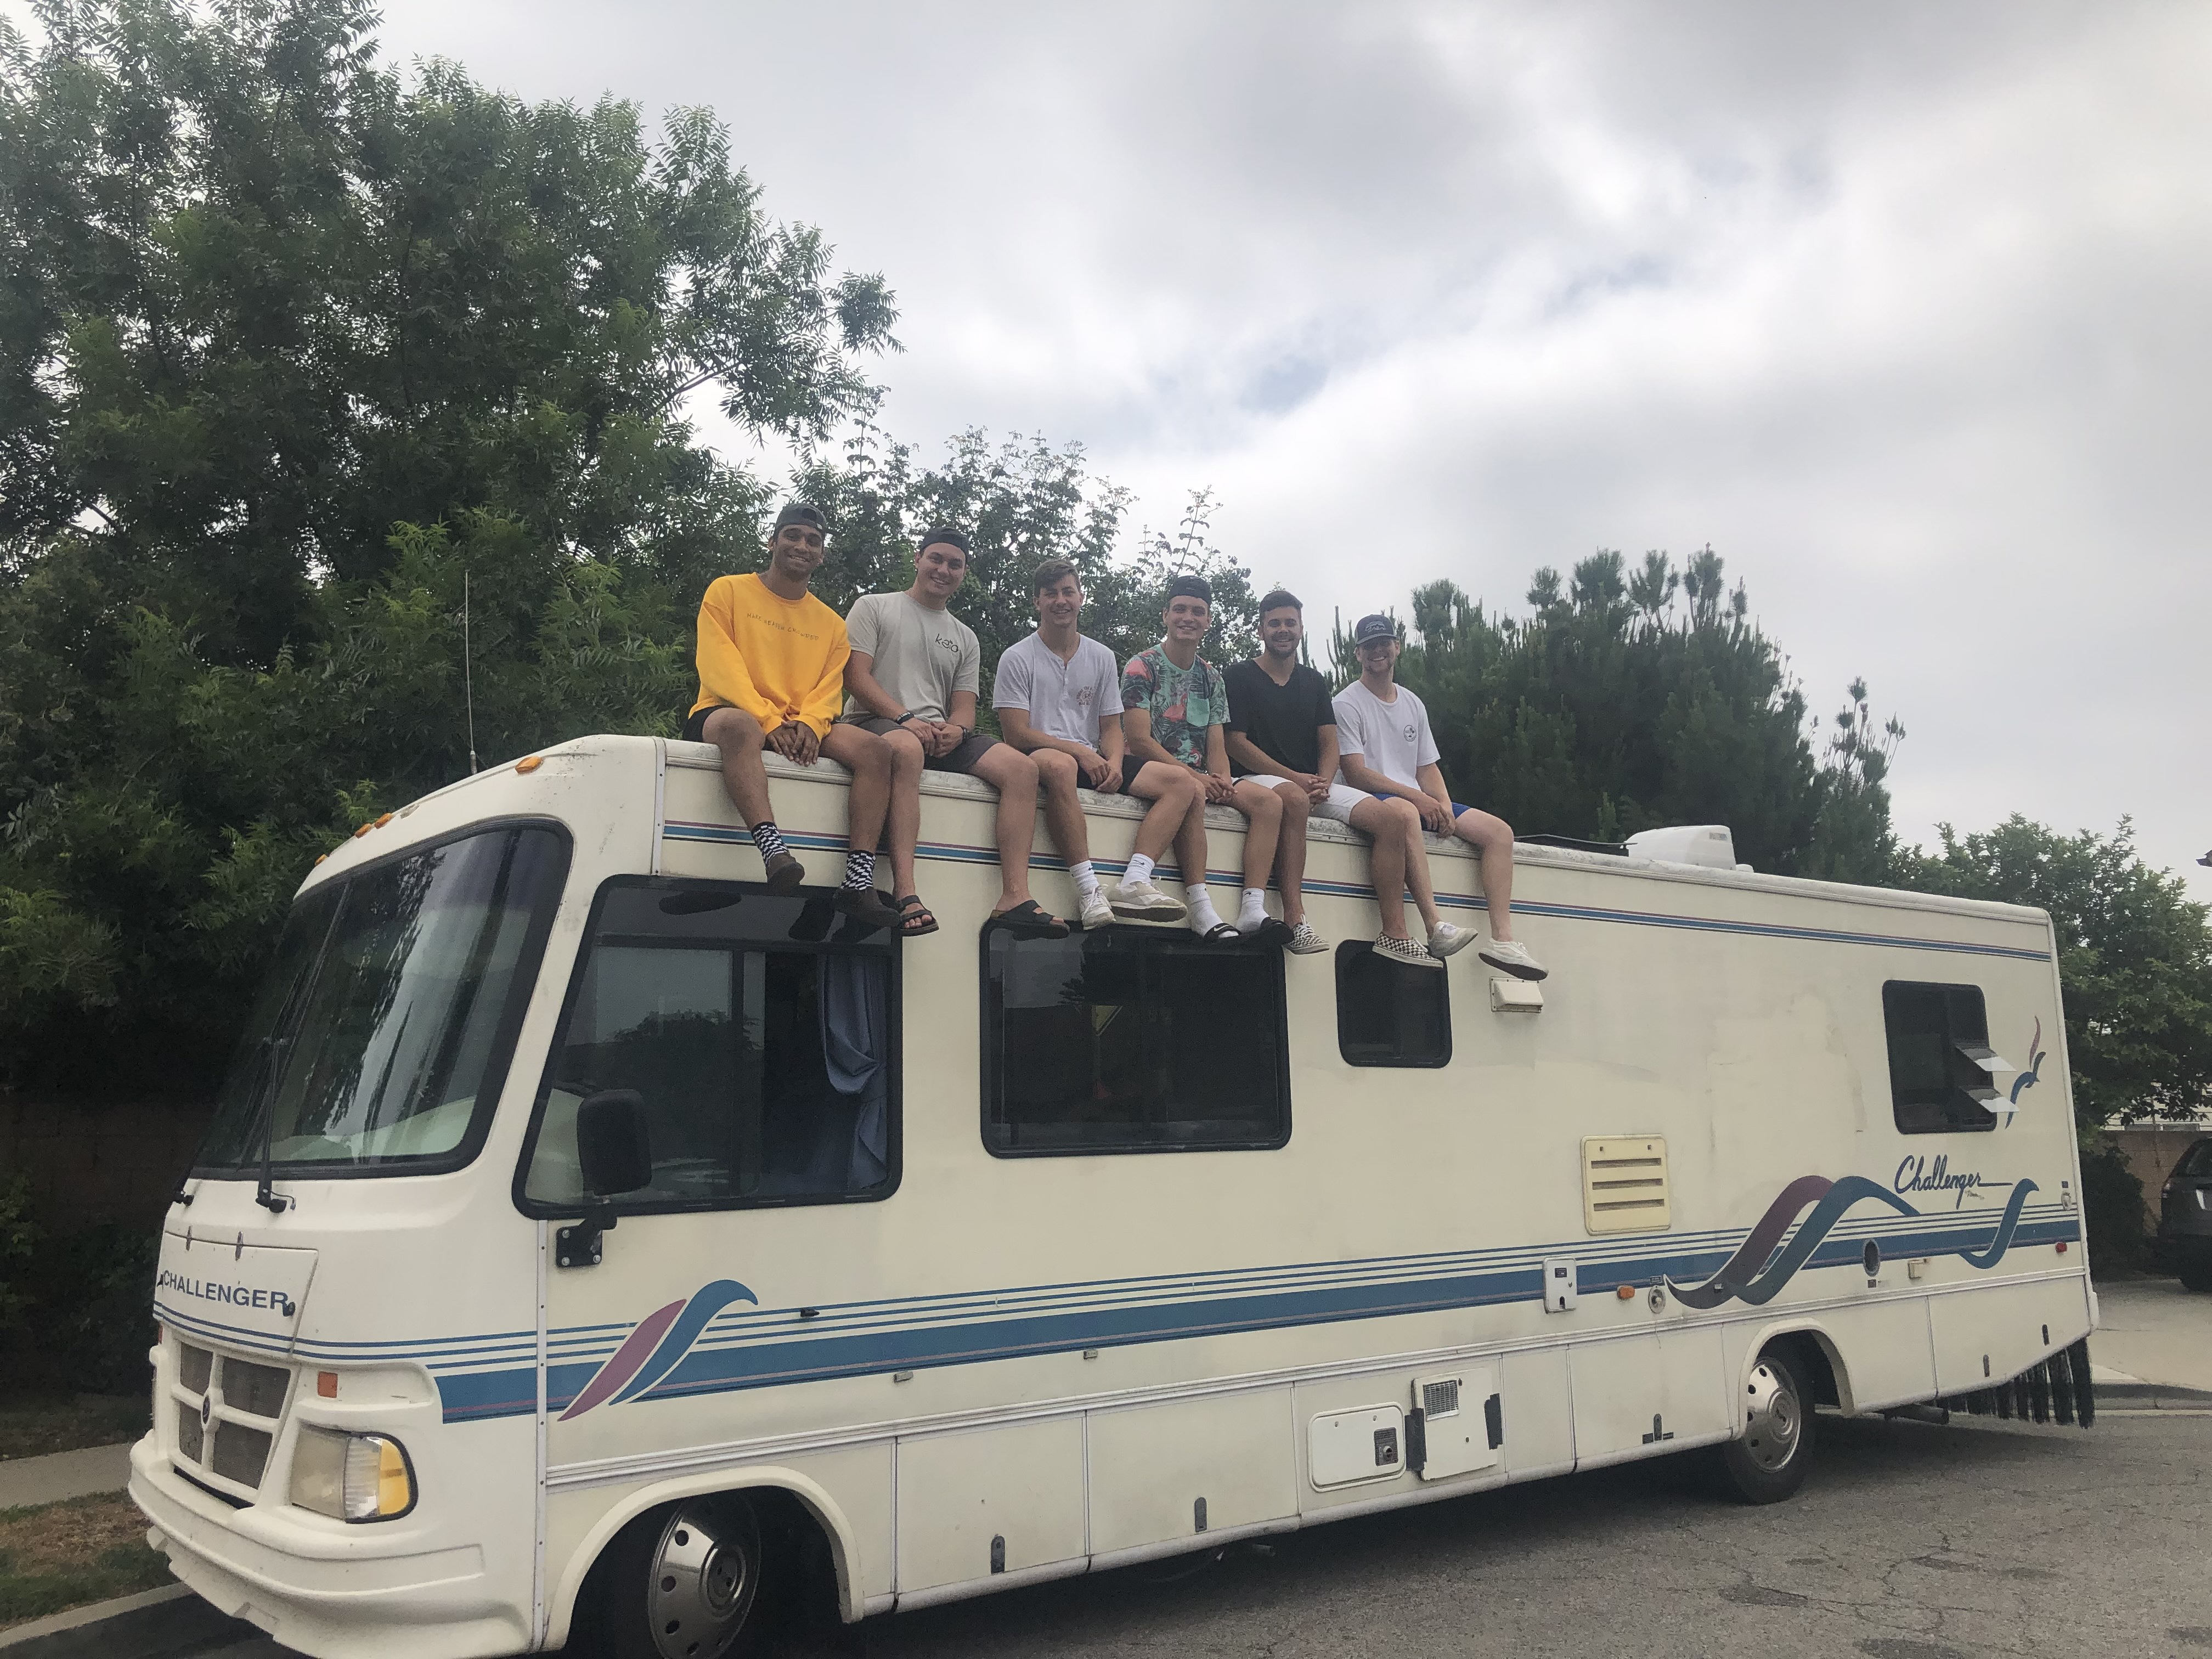 The students of EveryHeart Ministries pose atop their RV